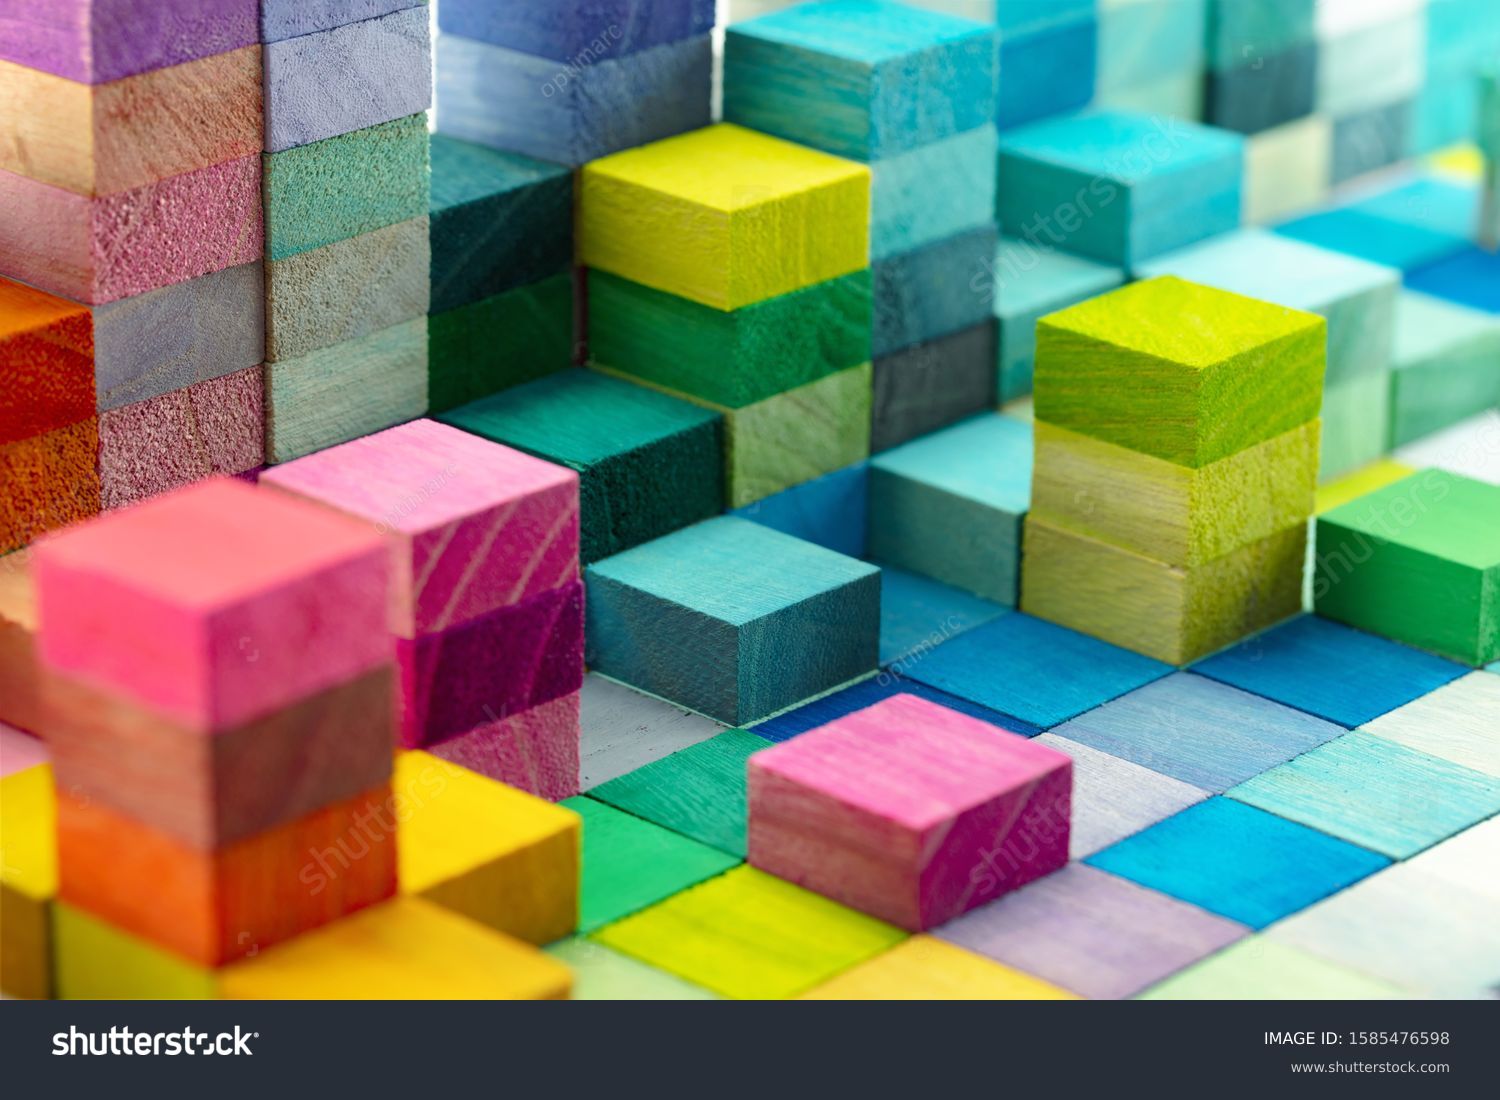 Spectrum of stacked multi-colored wooden blocks. Background or cover for something creative, diverse, expanding,  rising or growing. shallow depth of field. #1585476598